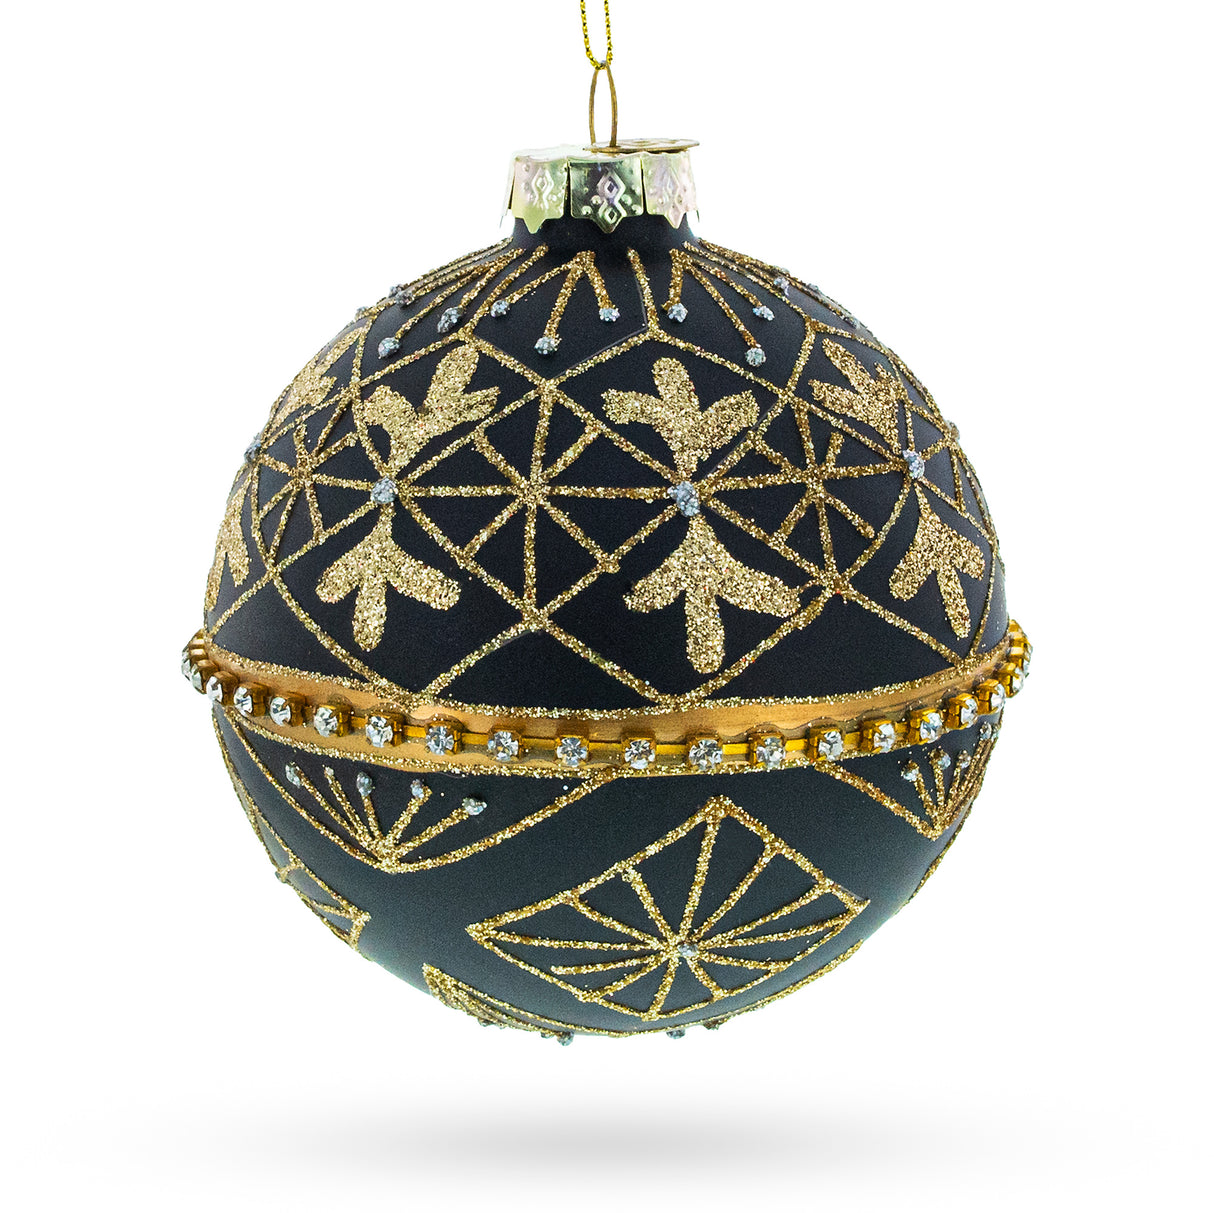 Striped Black with Diamond Accents - Blown Glass Christmas Ornament in Black color, Round shape